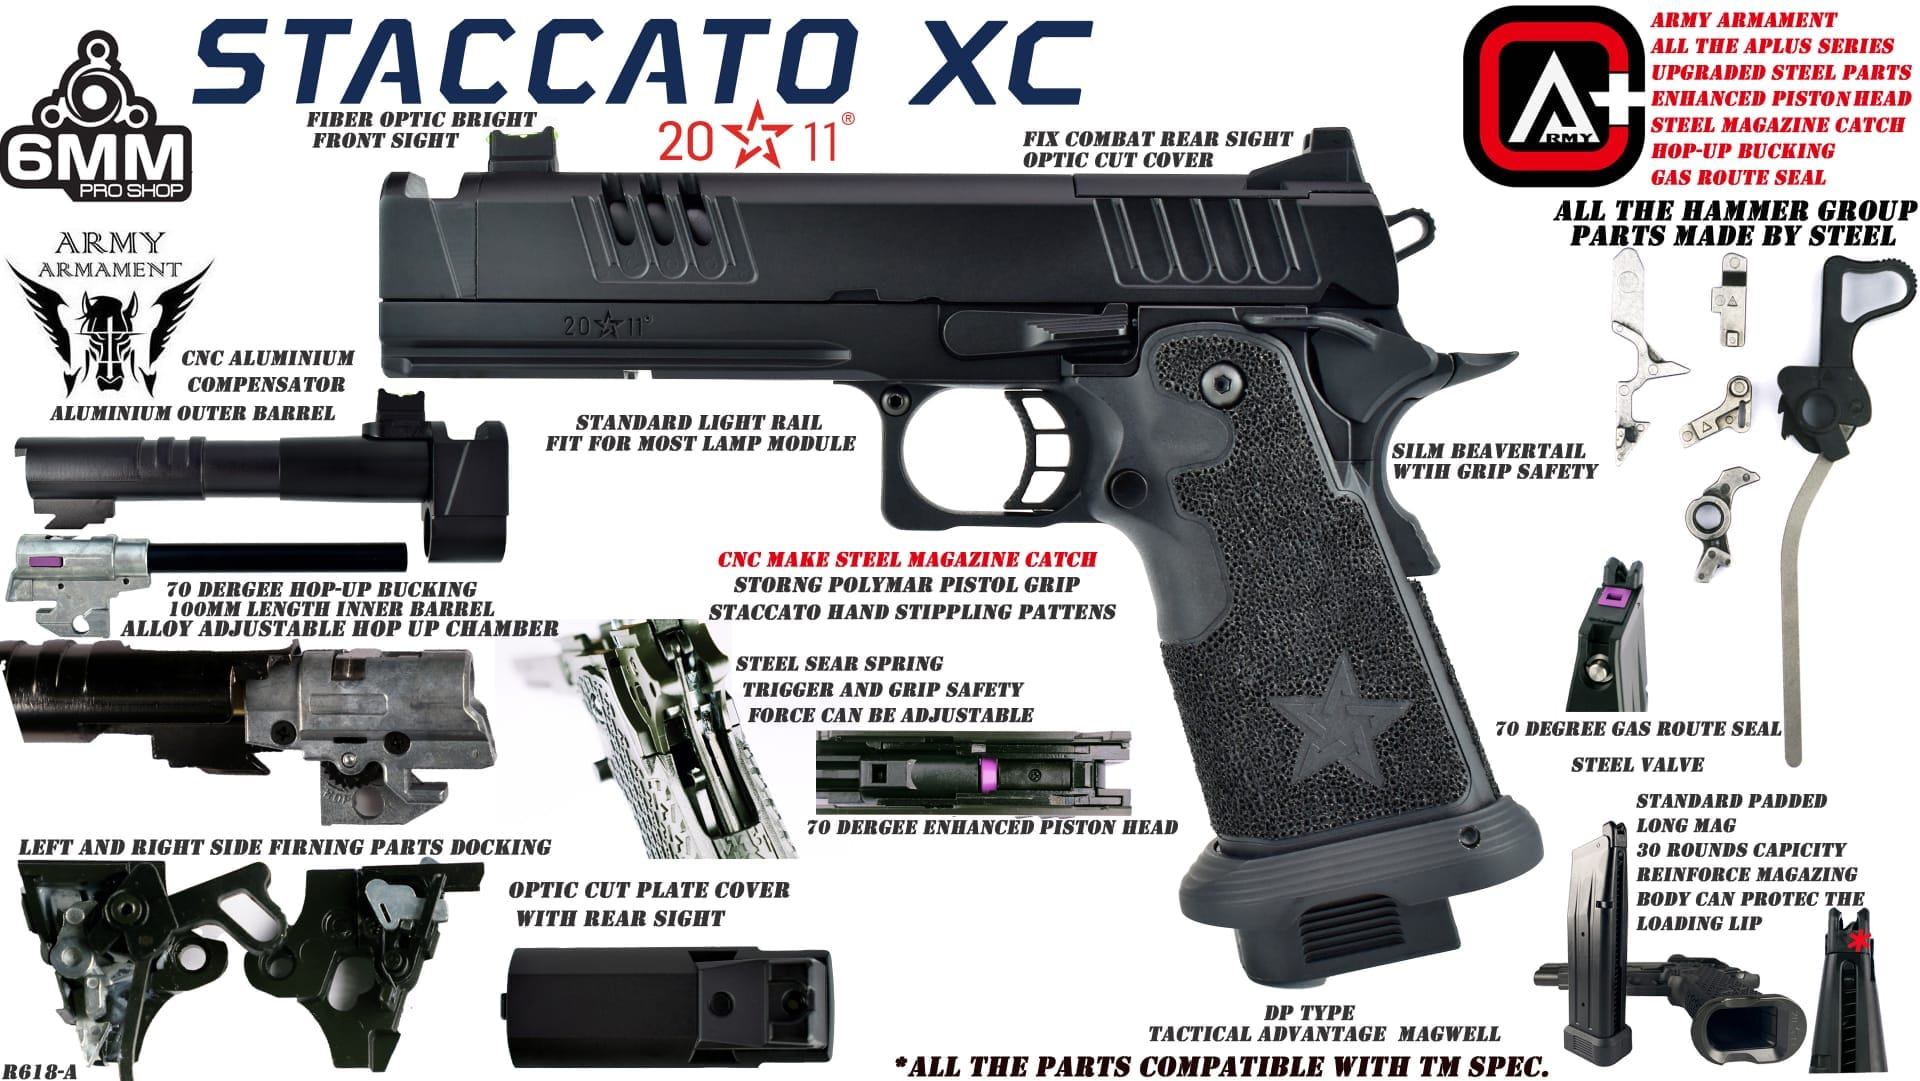 Army Armament Staccato XC